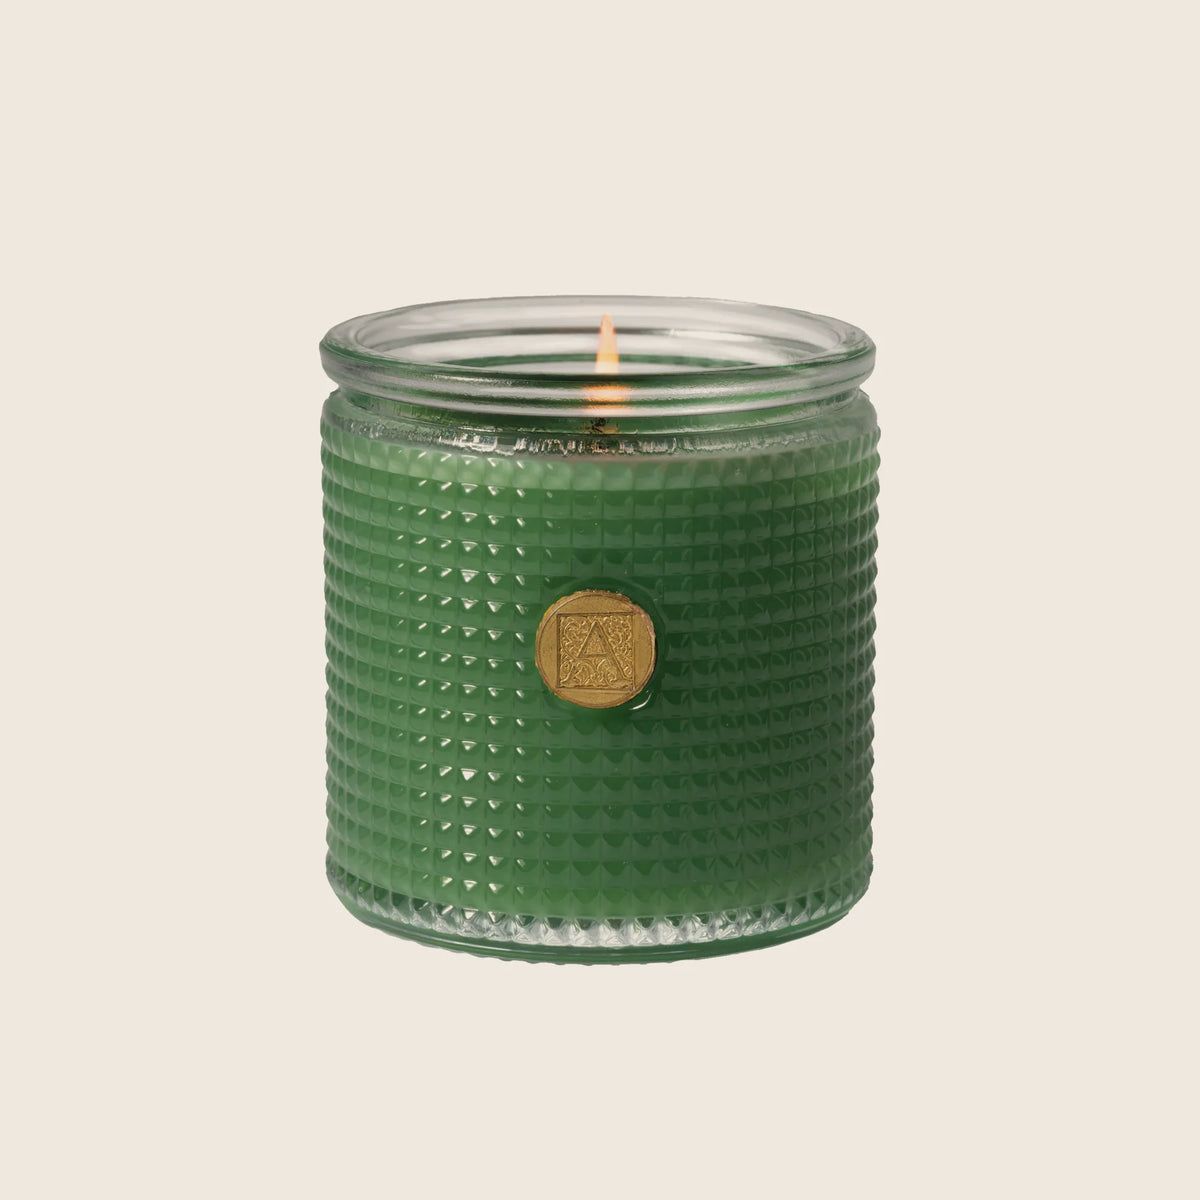 In The Garden - Textured Glass Candle | Aromatique